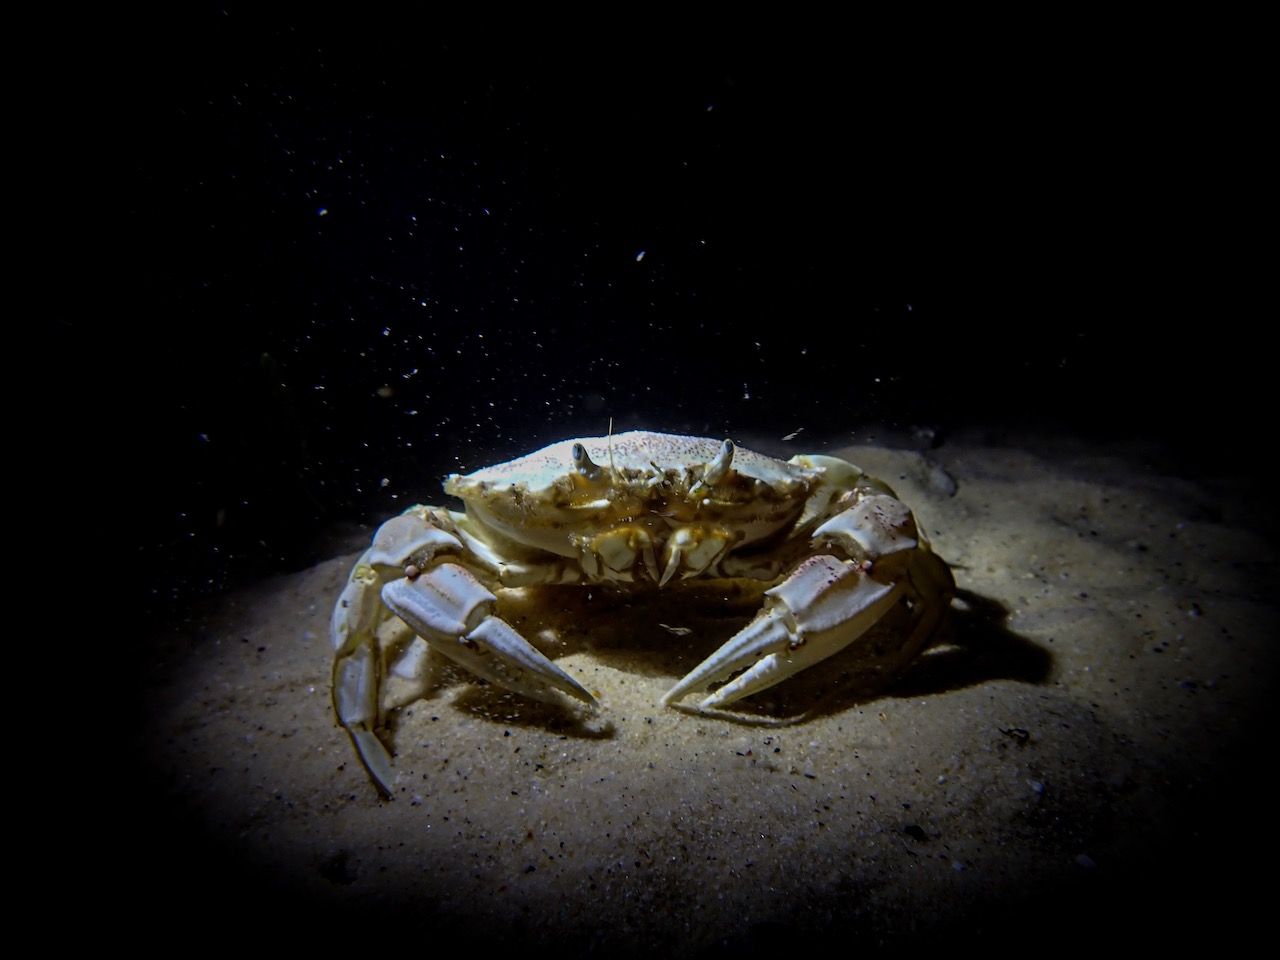 a crab poses for a photo during a night dive in Cape Town